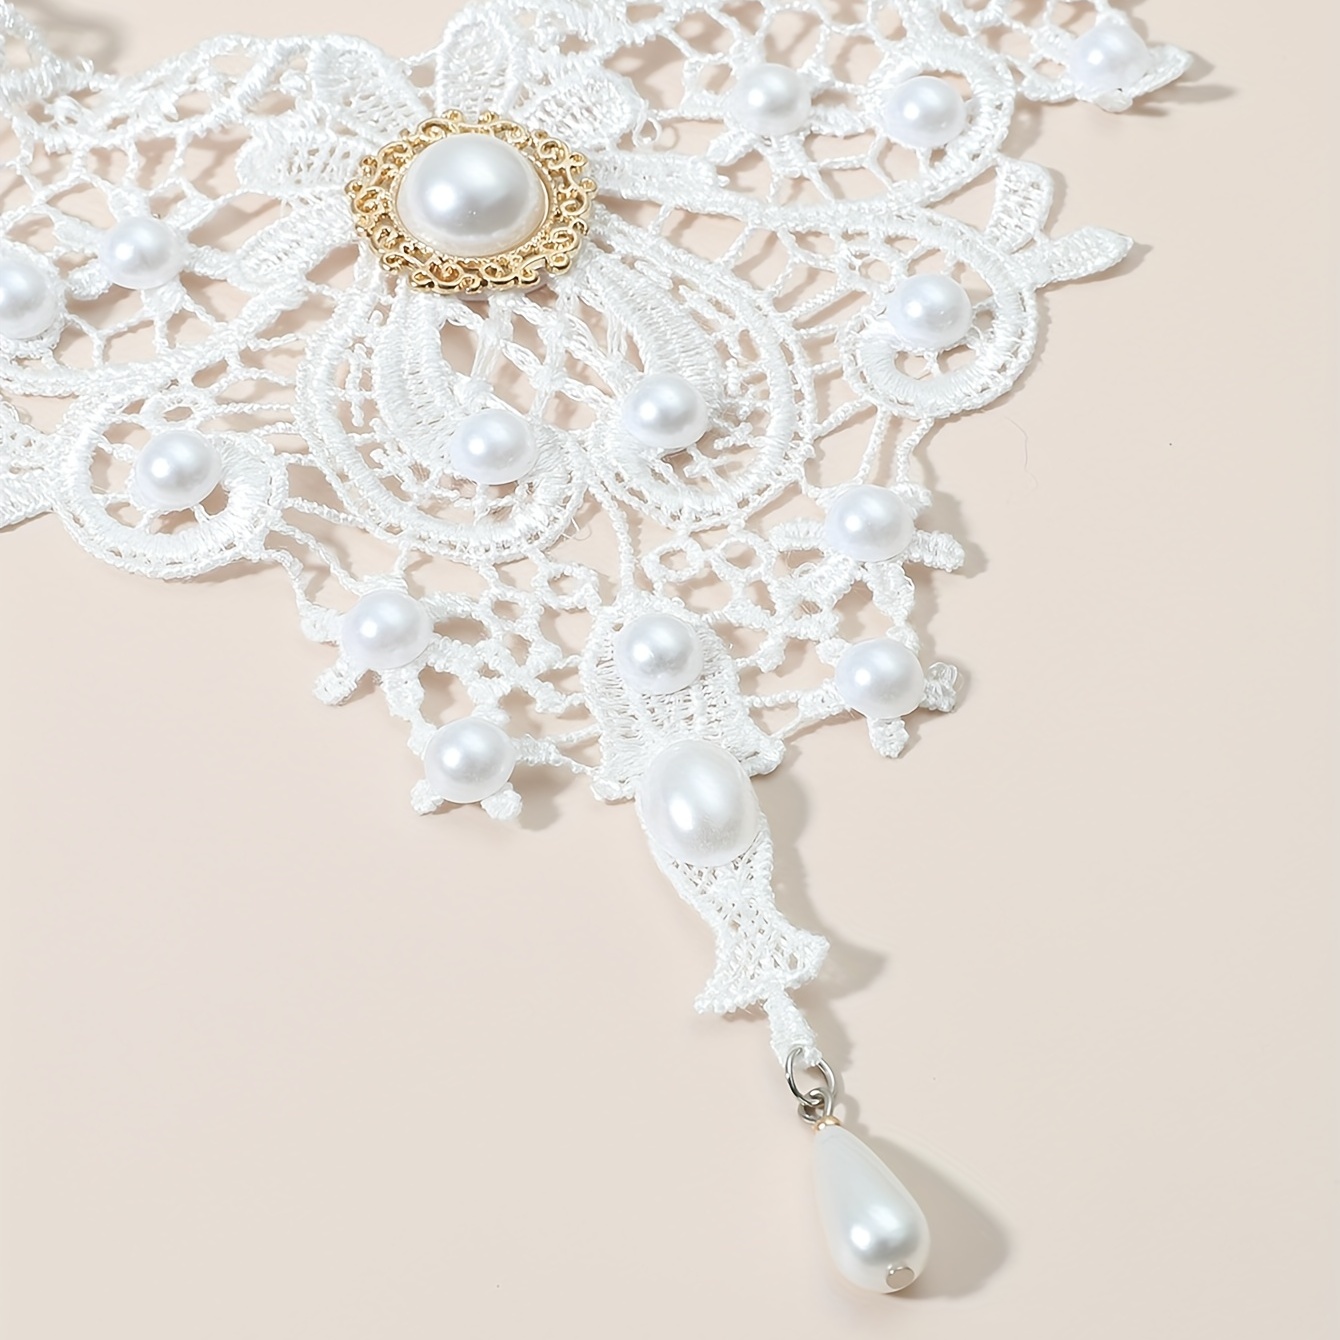 Lady In Lace Victorian Collar Choker Necklace Pearl